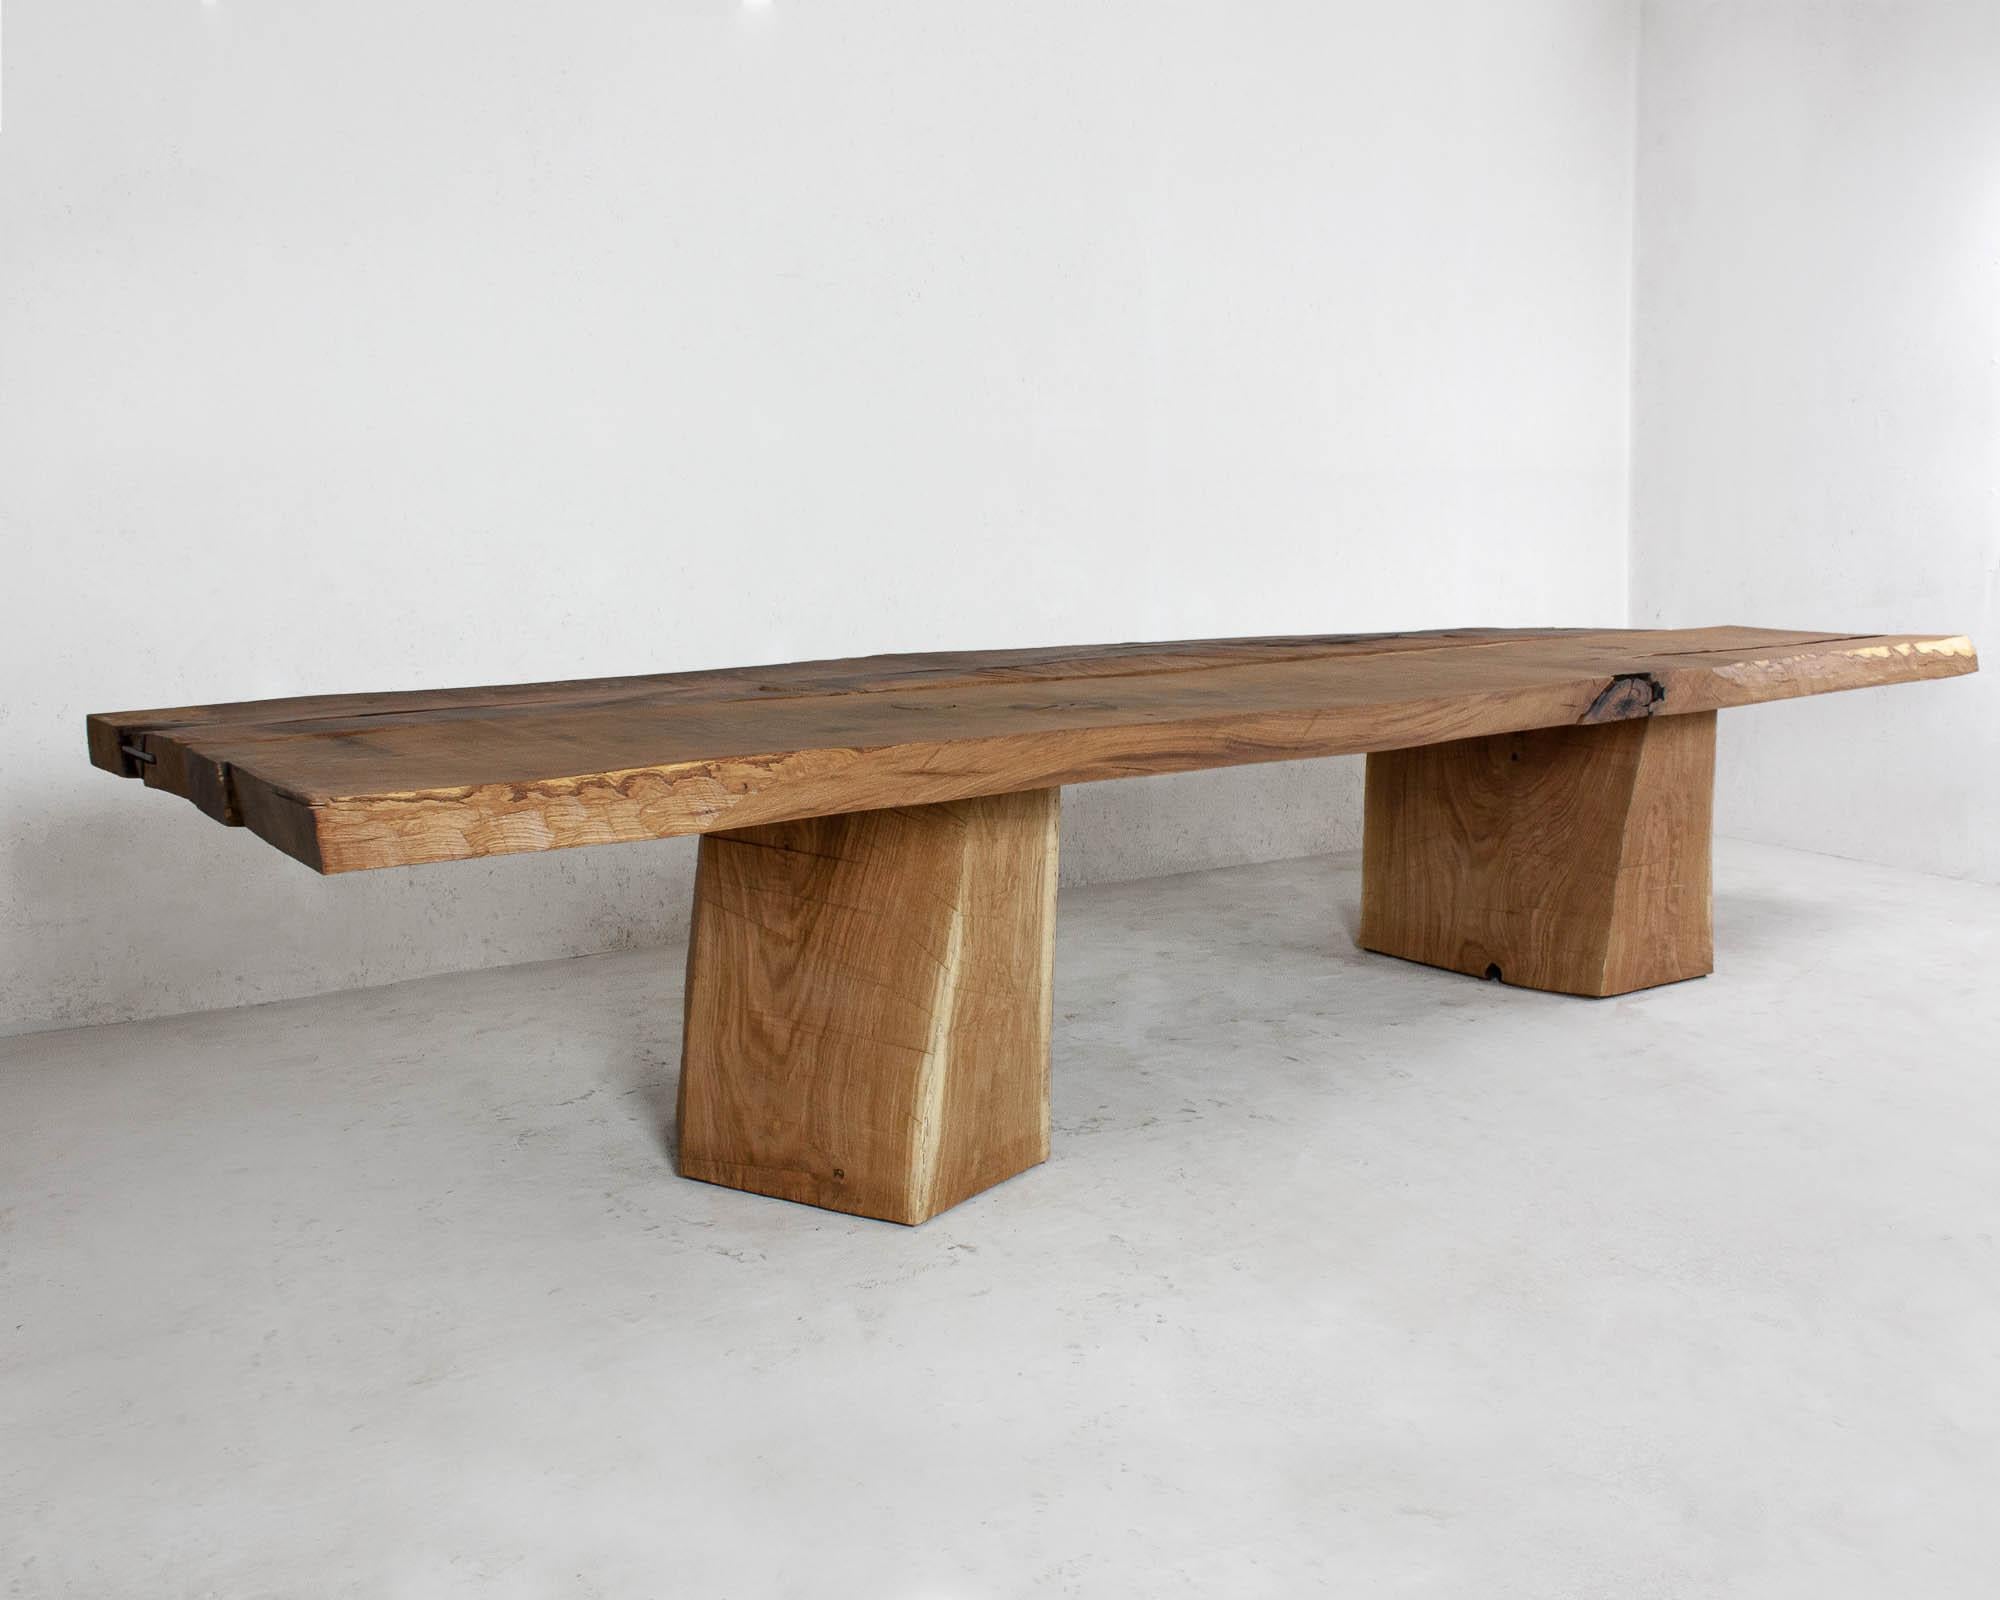 Massive dining table made of solid oak (+ linseed oil)
(Outdoor use OK)


Warm furniture’s made by Russian designer Denis Milovanov for 'Soha Concept' design studio. Simplicity of shapes. Authentic material.
Wooden items are created from oak